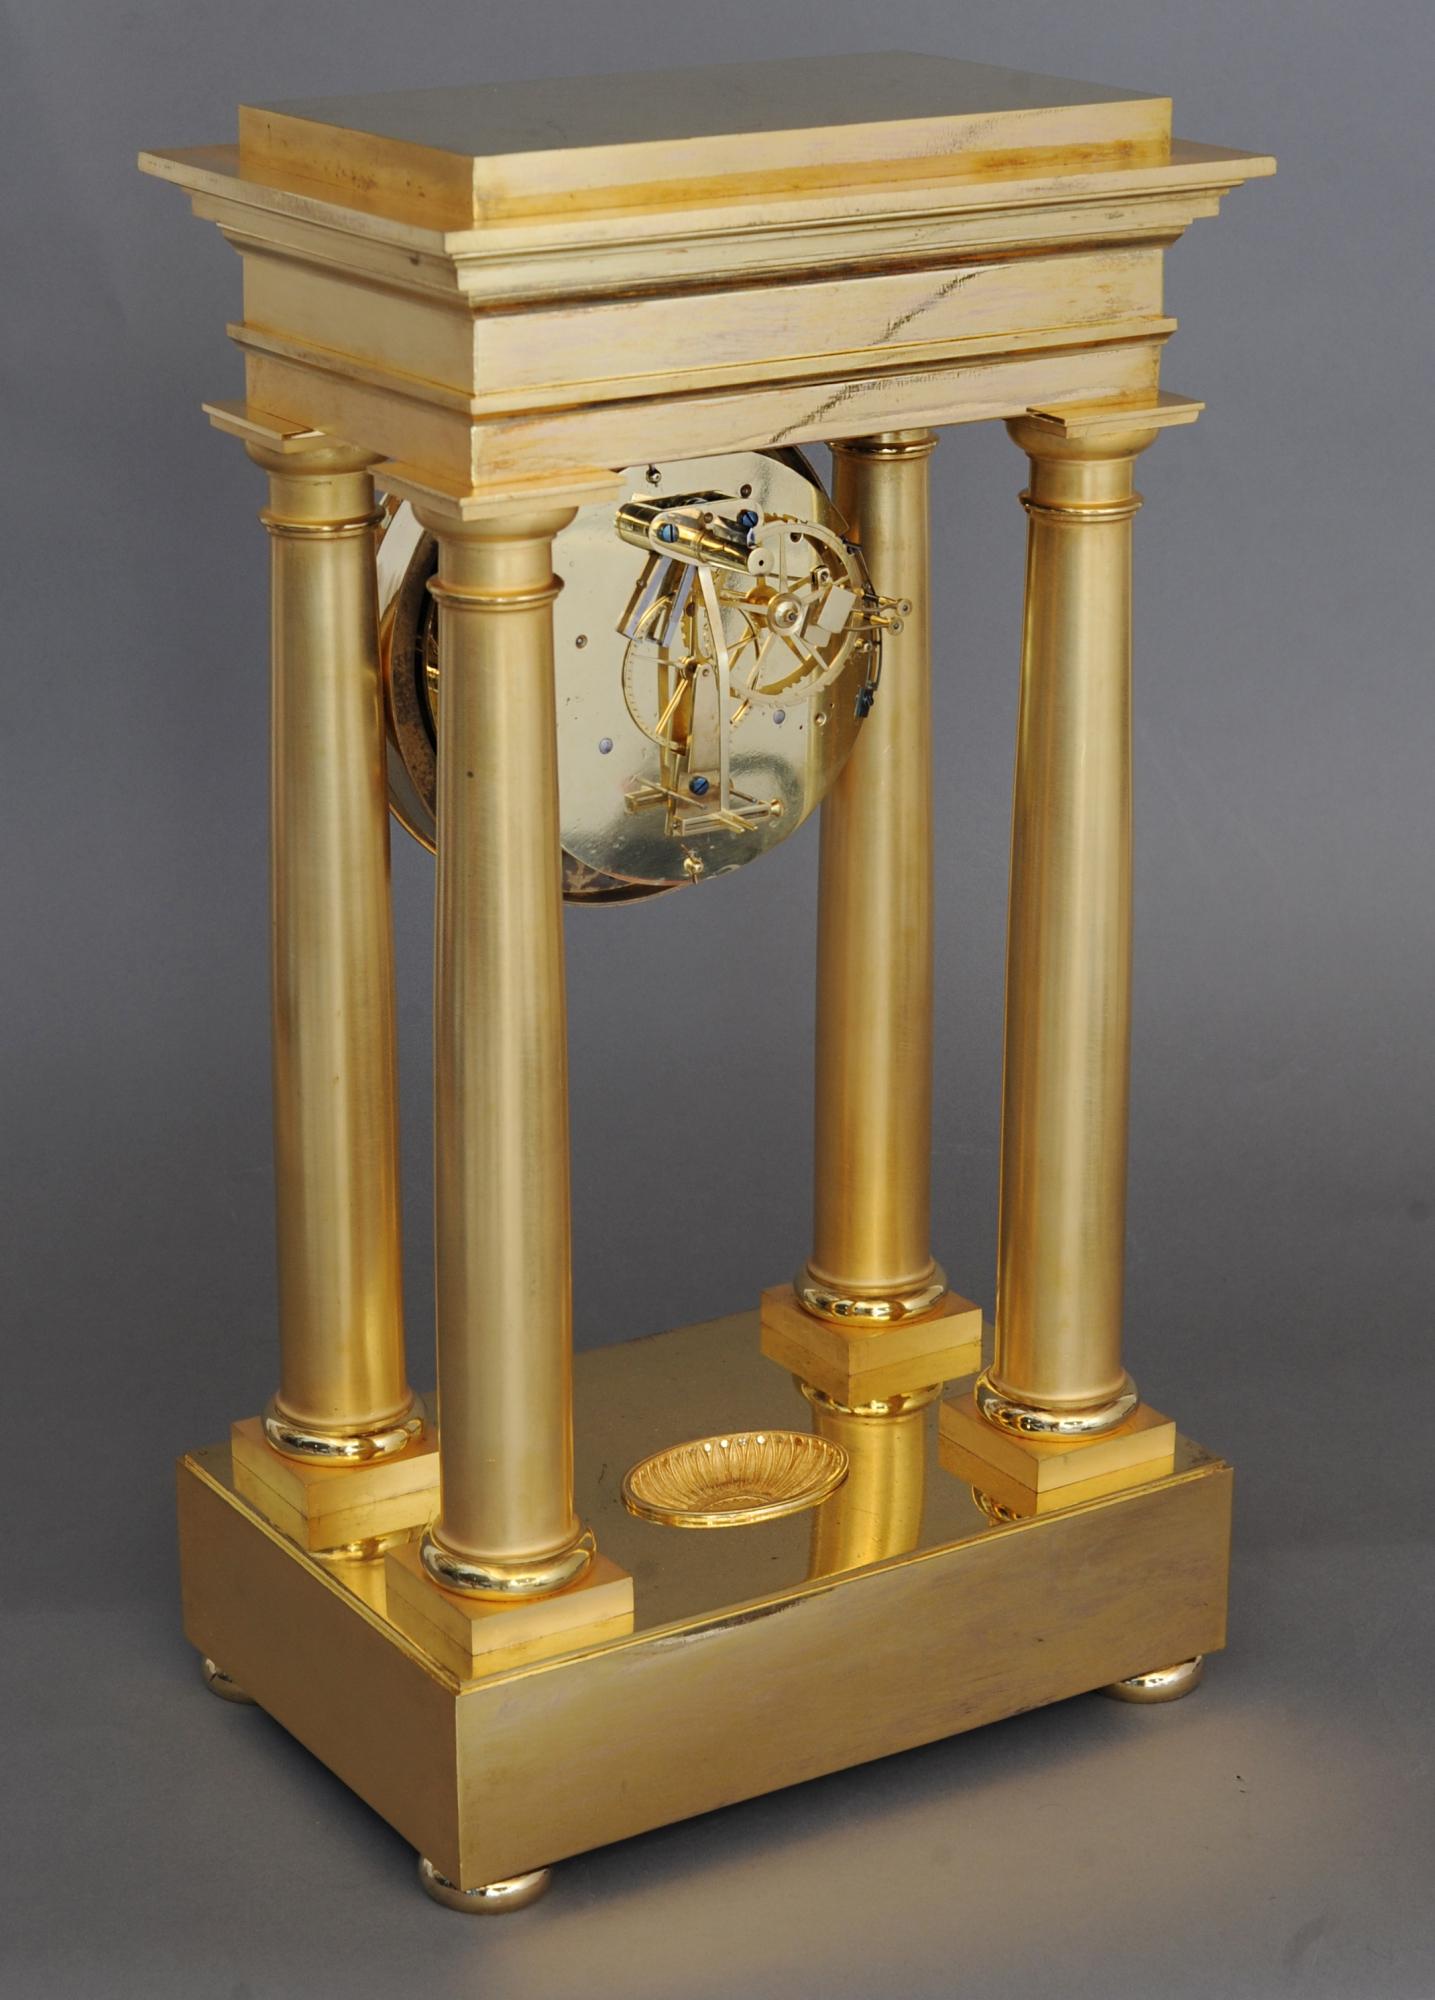 An extremely high quality early Empire four pillar table precision regulator mantel clock. This hight quality clock is made by the famous clock maker Dieudonné Kinable, circa 1800. Quarter striking on 2 bells knife edge suspension pin wheel